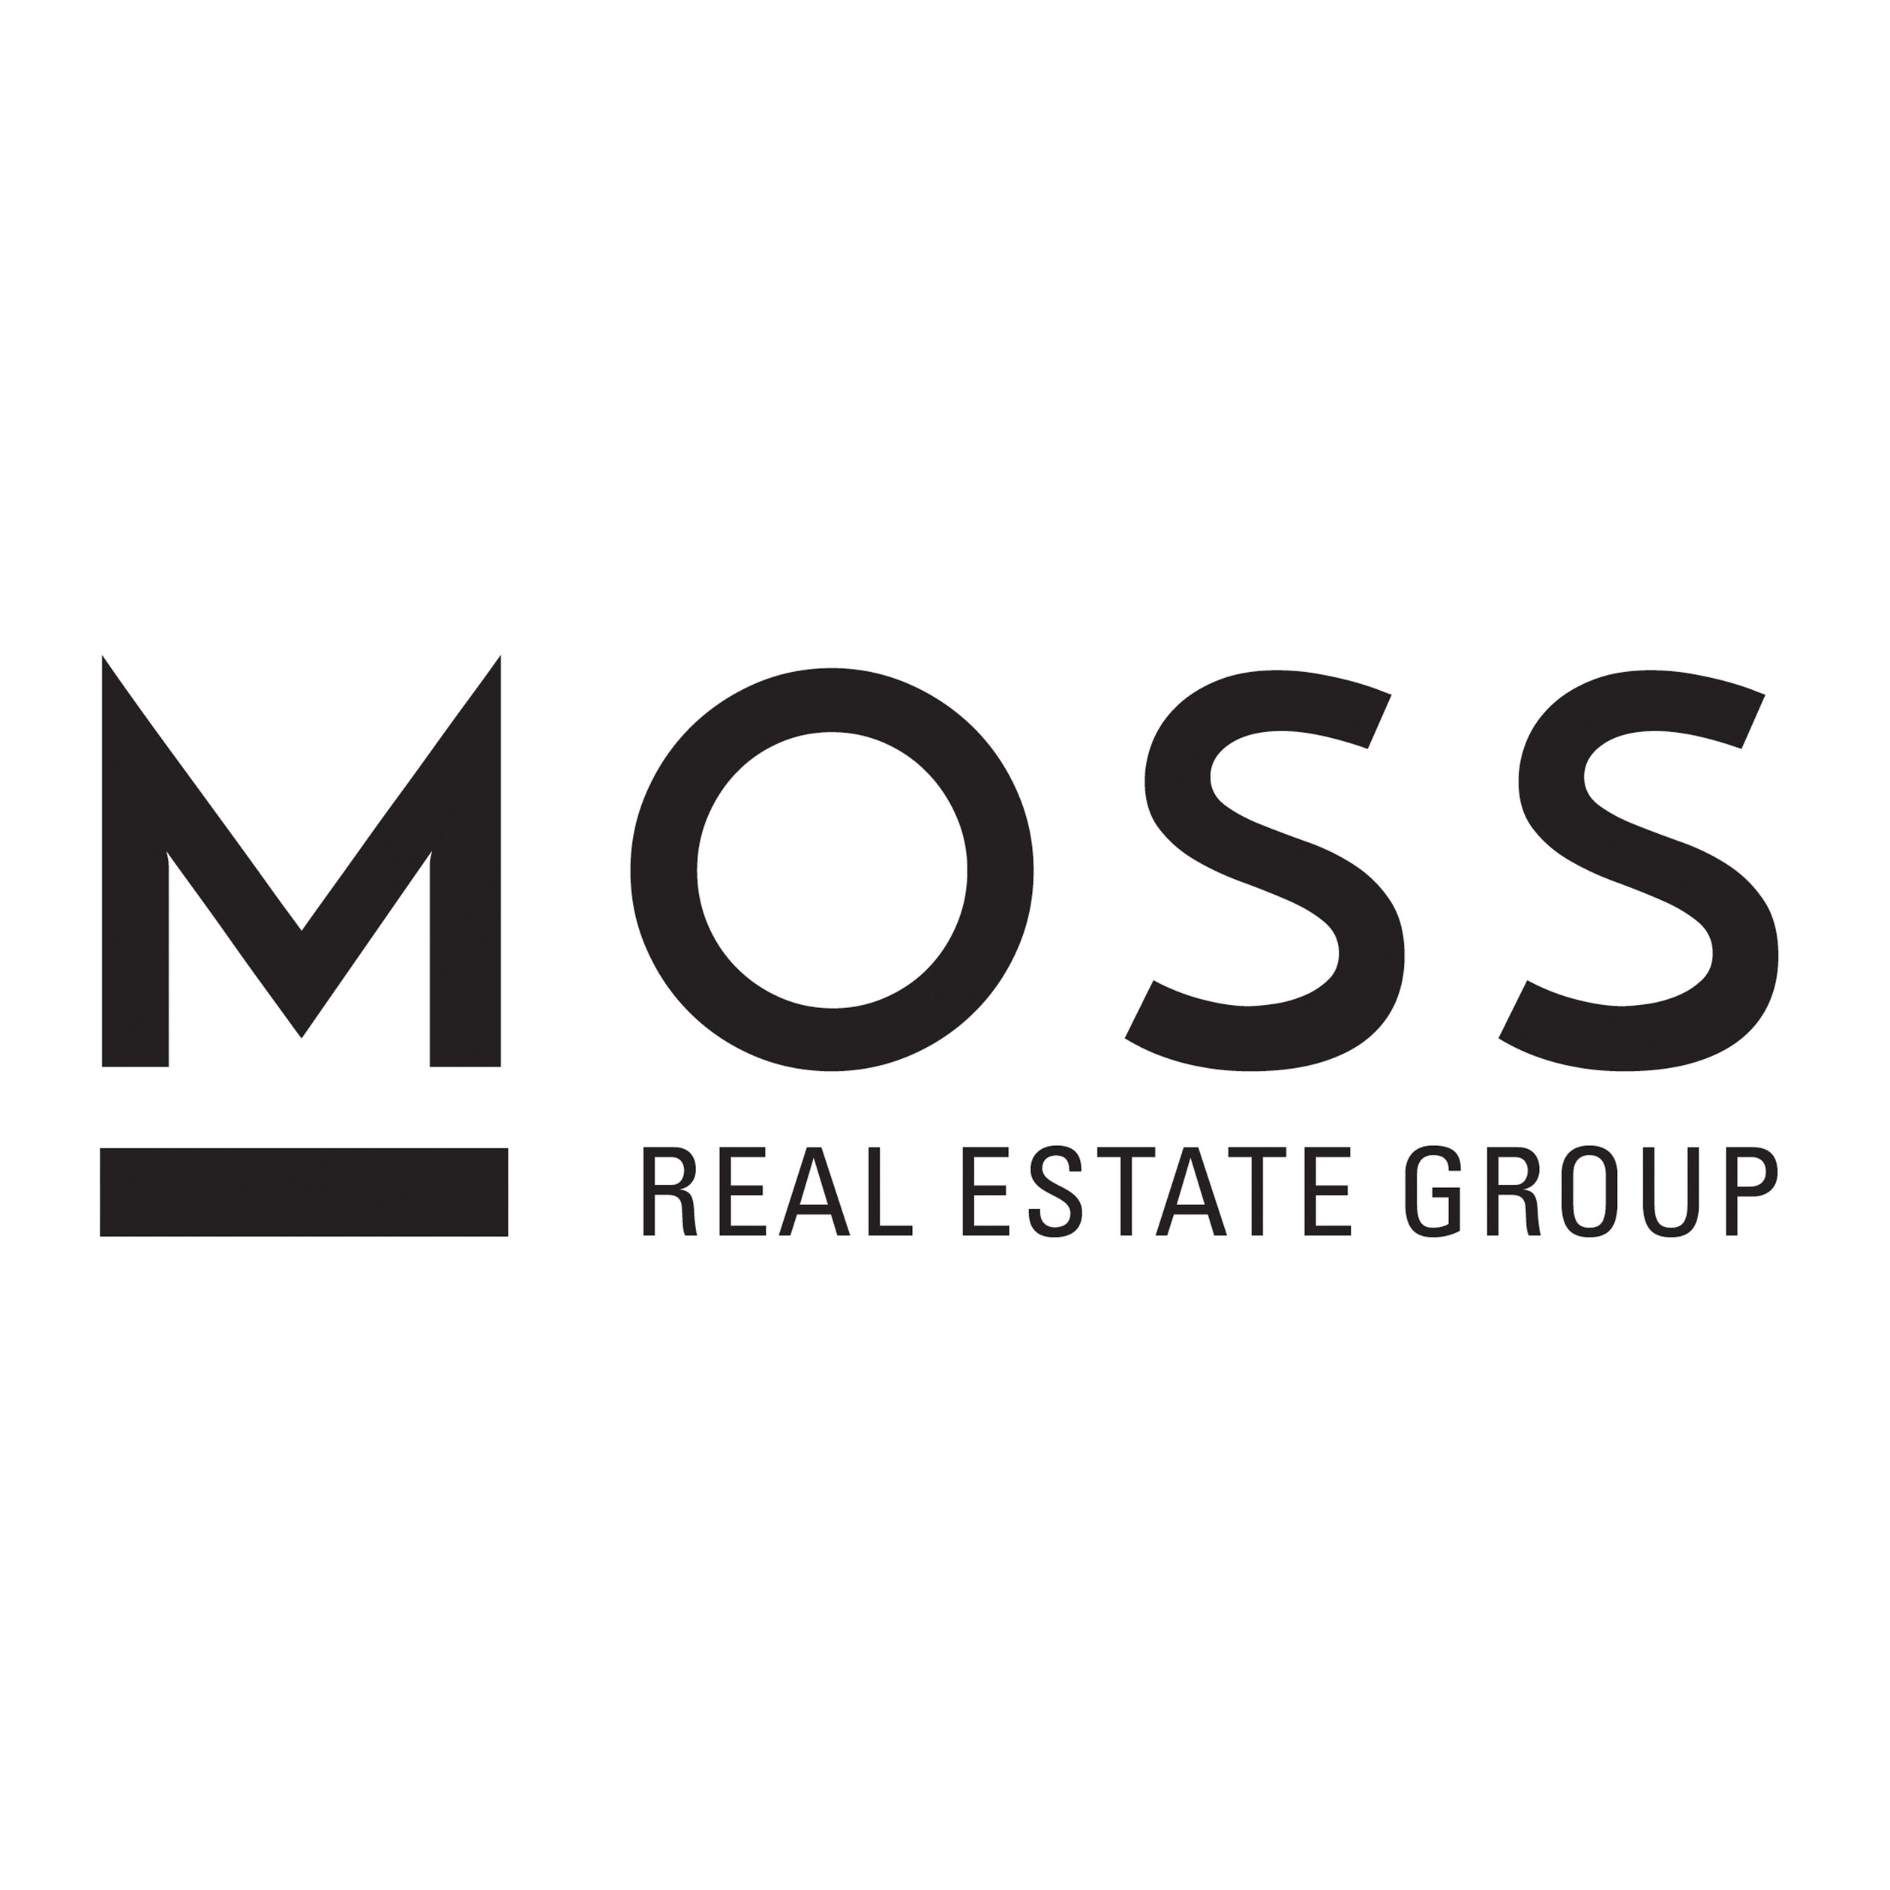 The logo of the Real Estate Group